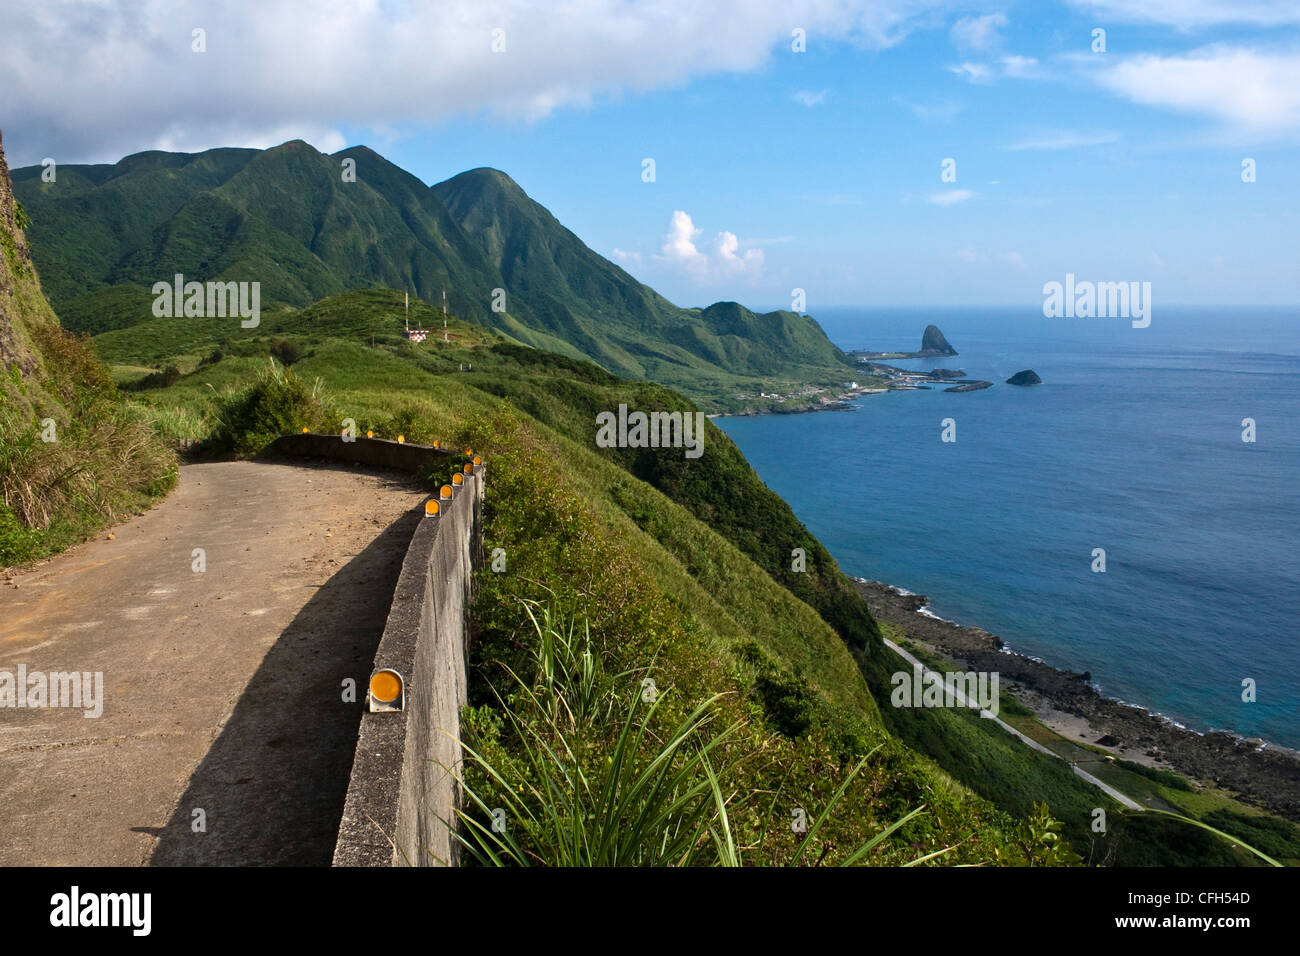 View of the dramatic coastal landscape of Lanyu (Orchid Island), Taiwan Stock Photo